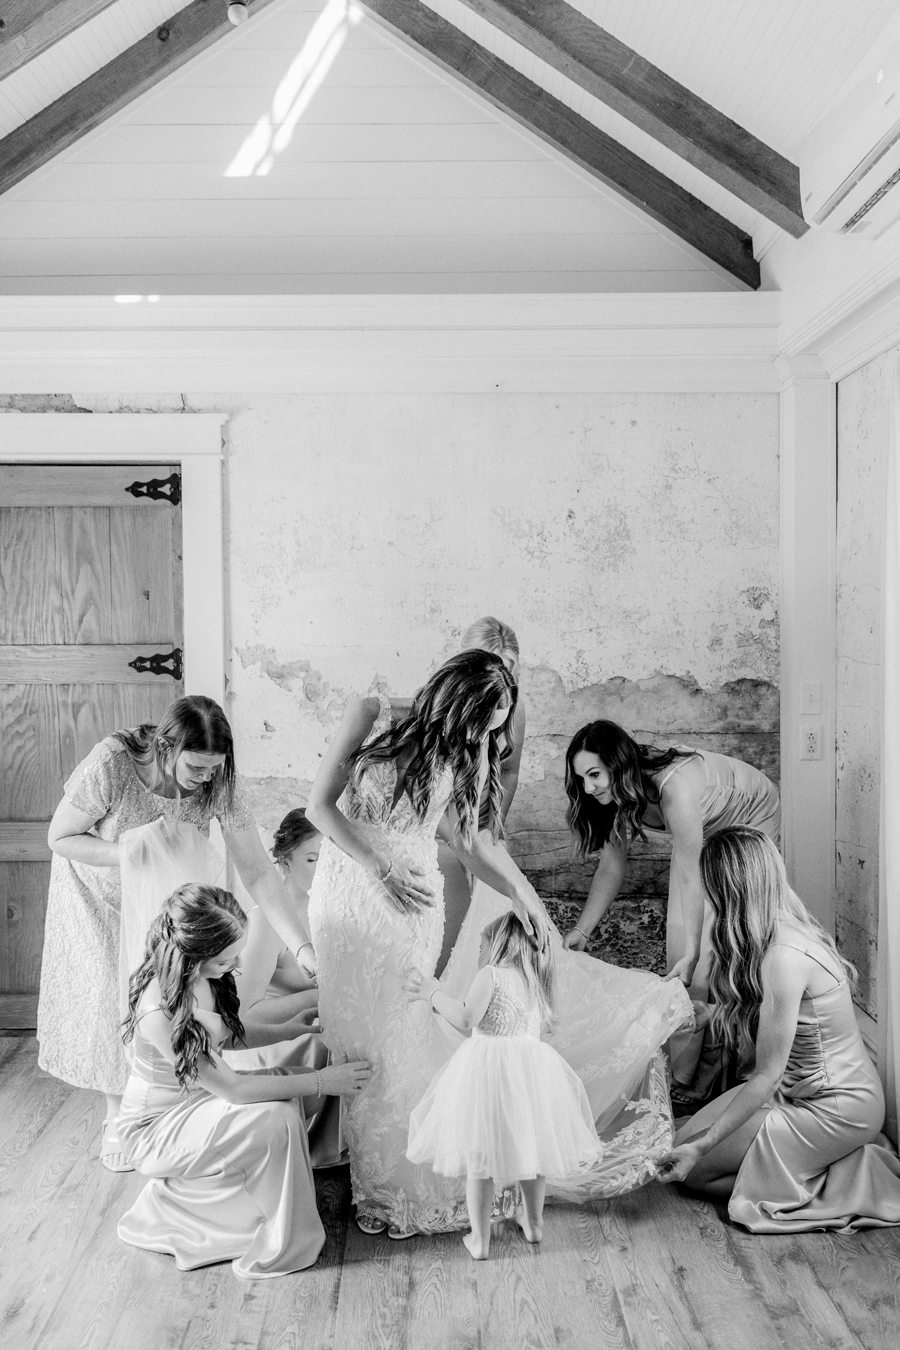 A Wildcliff Wedding in Blackwater, Missouri by Columbia, MO photographer Love Tree Studios.